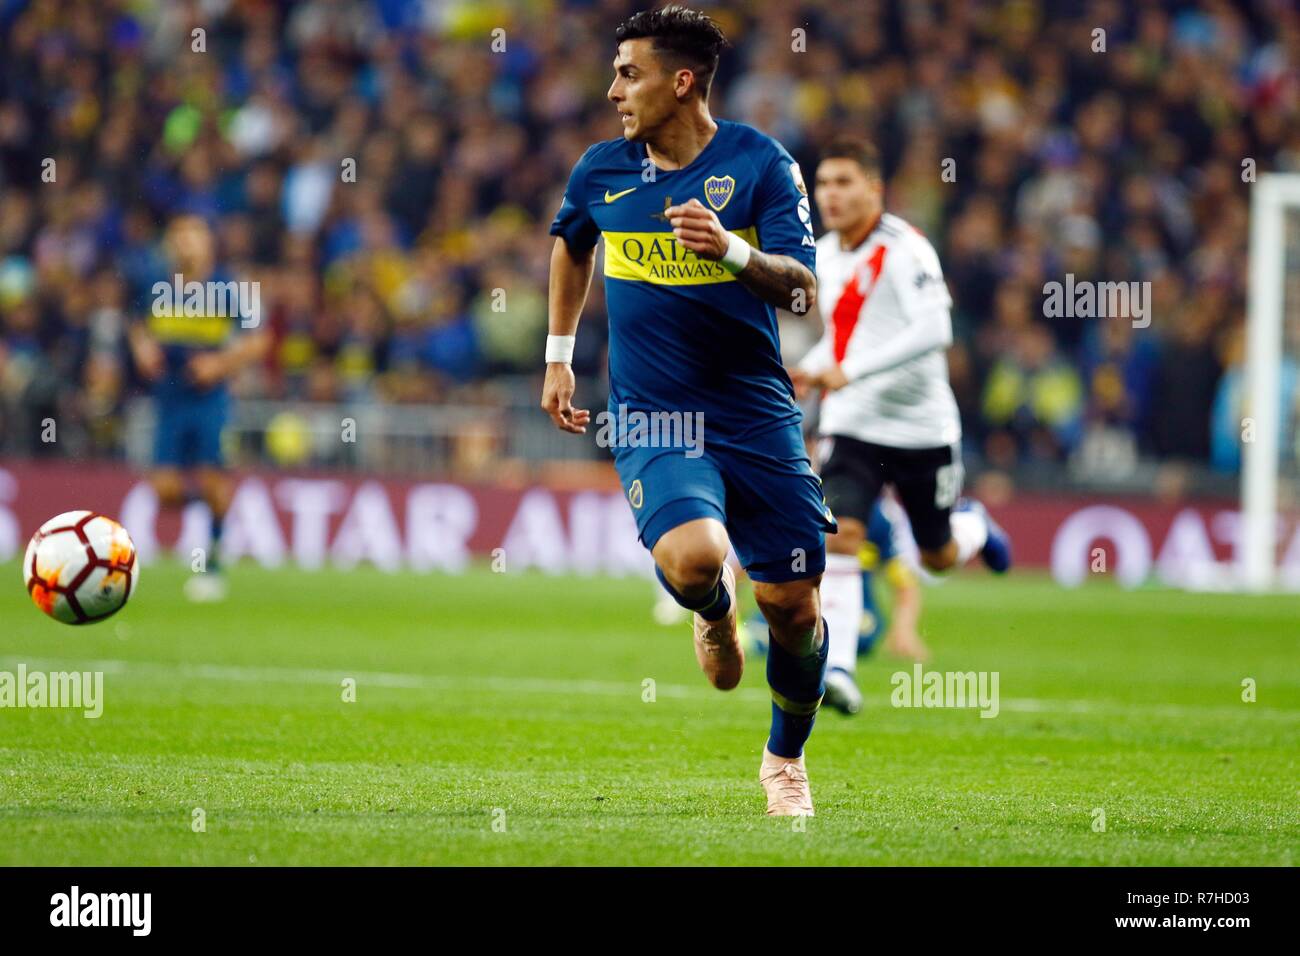 Madrid, Spain. 9th Dec, 2018. Cristian David Pavon (Boca Juniors) in action during the second leg match between River Plate and Boca Juniors as part of the Finals of Copa CONMEBOL Libertadores 2018 at Estadio Santiago Bernabeu in Madrid.River Plate won the title of Copa Libertadores 2018 by beating Boca Juniors. Credit: Manu Reino/SOPA Images/ZUMA Wire/Alamy Live News Stock Photo